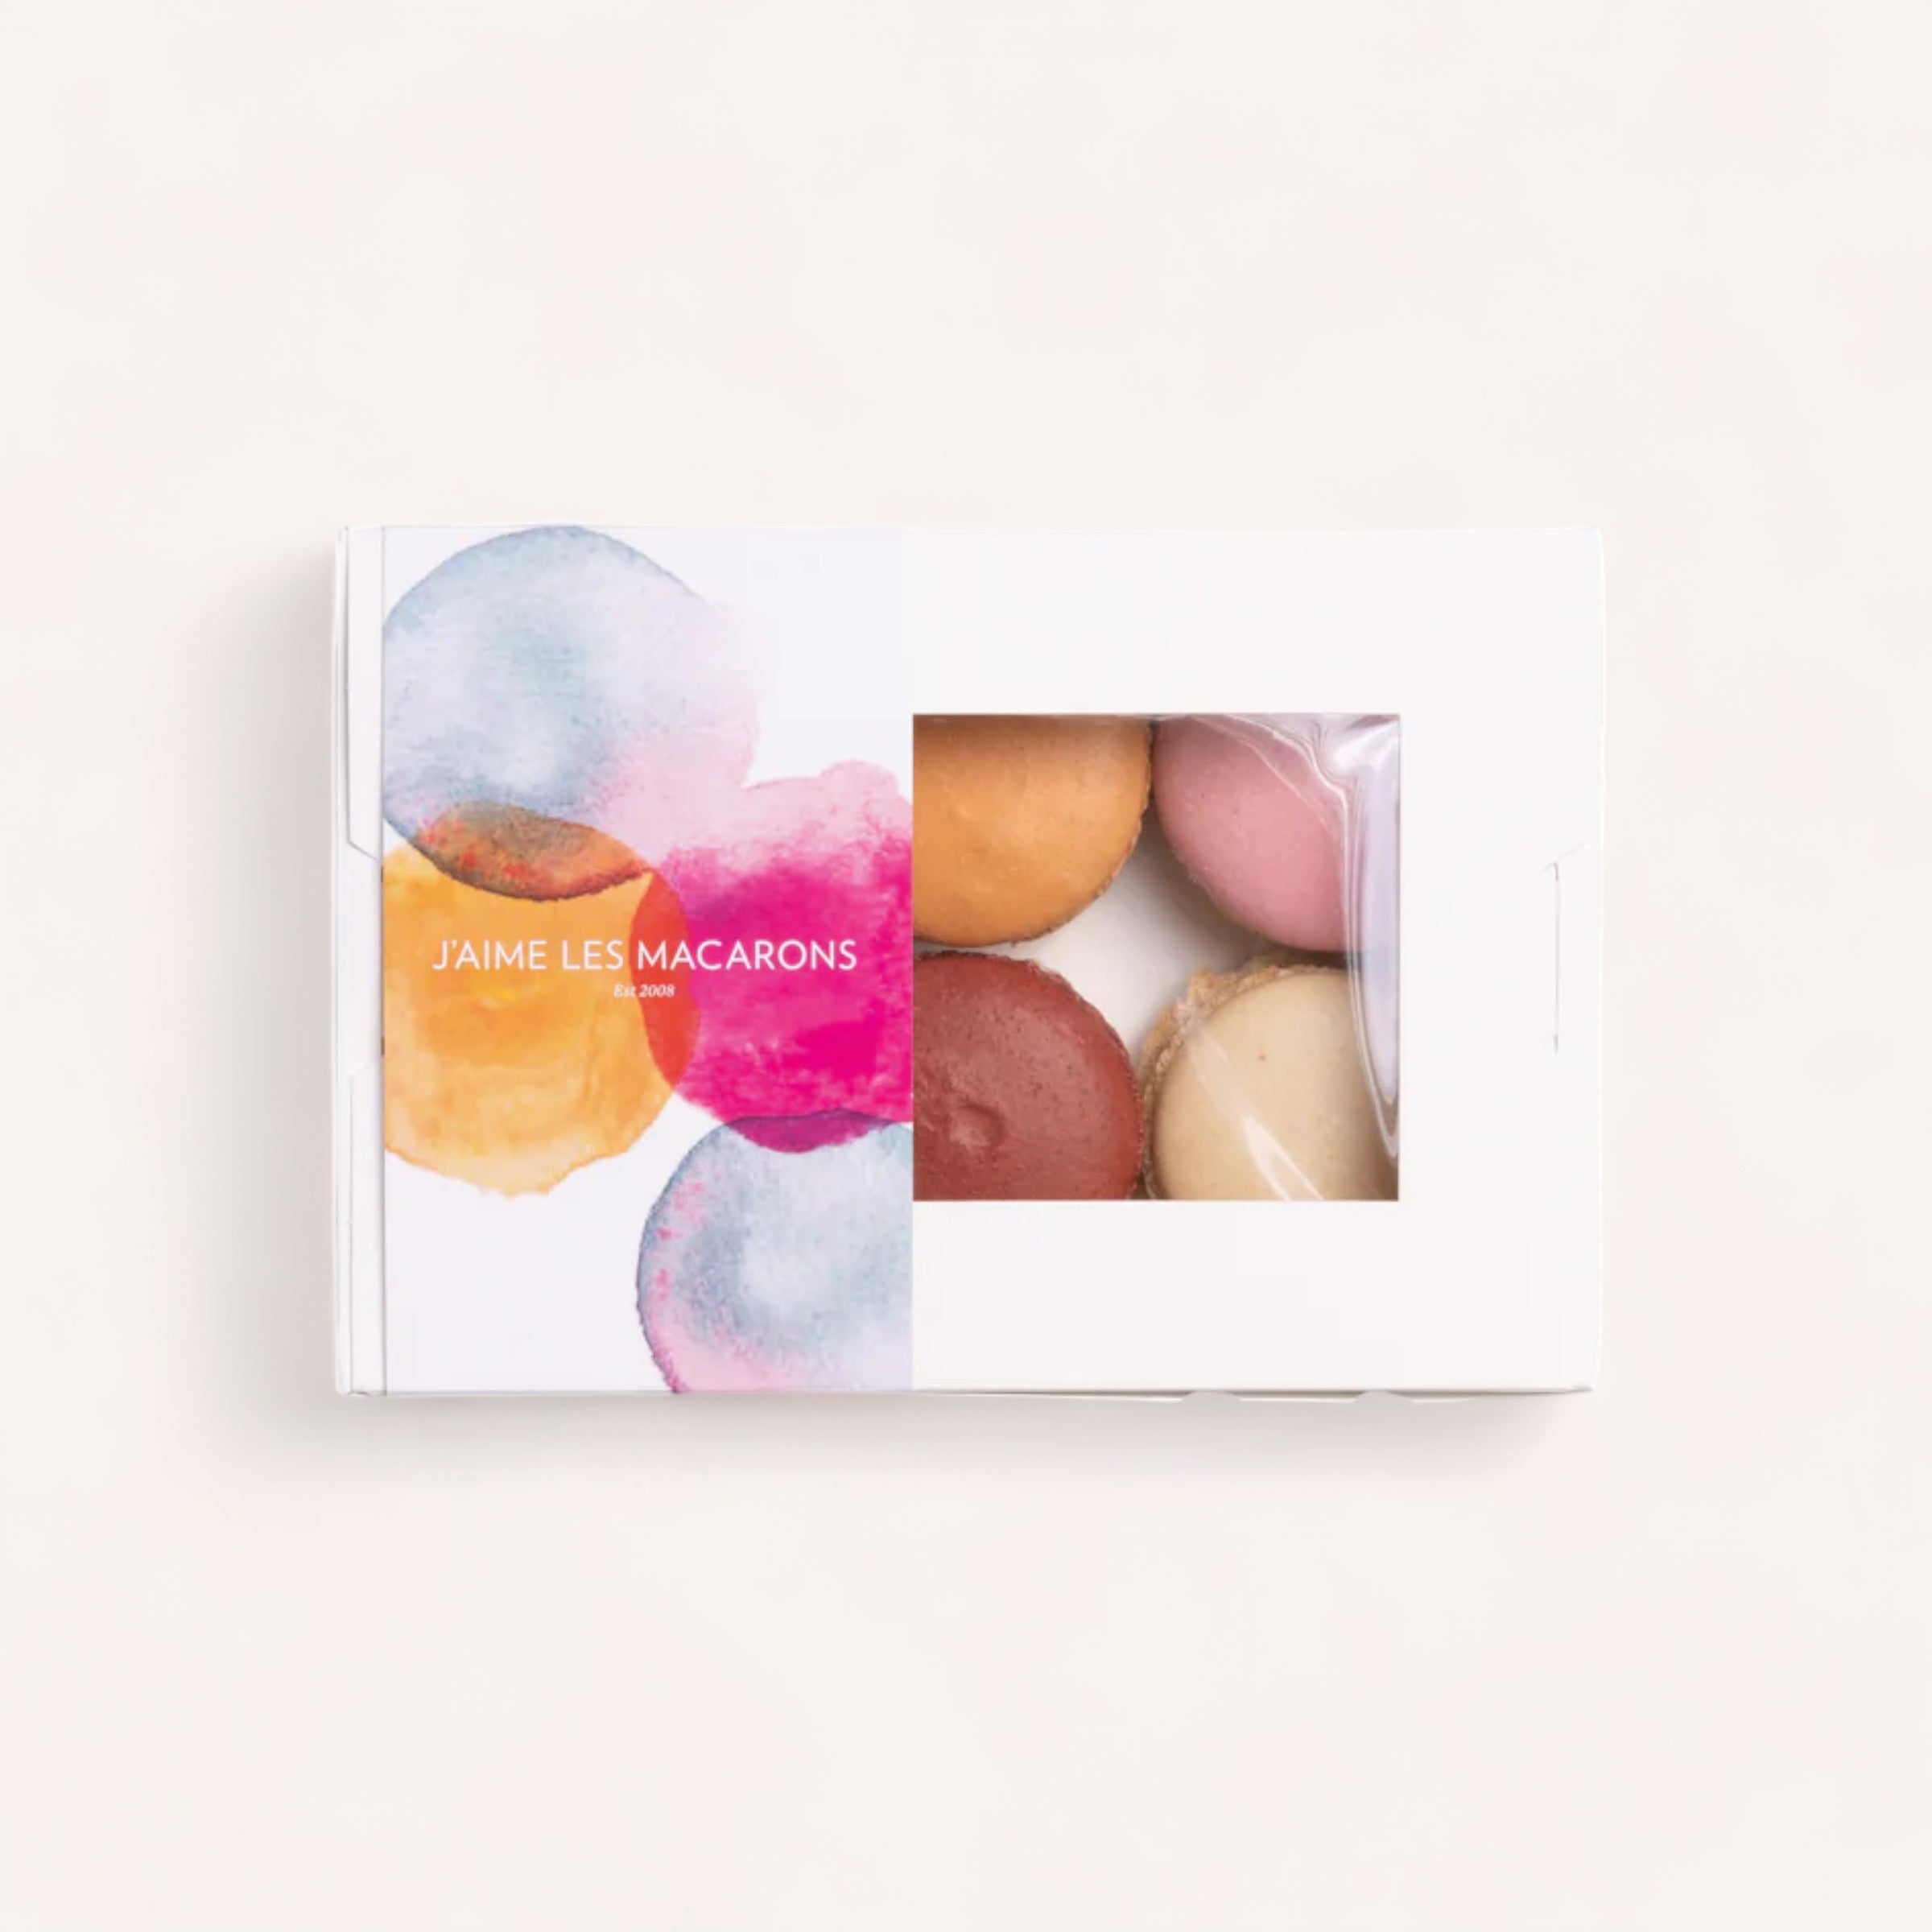 A box of colorful, handmade macarons by J'aime les Macarons with a watercolor design and the phrase "j'aime les macarons" on the cover, suggesting a love for these delicate French pastries.